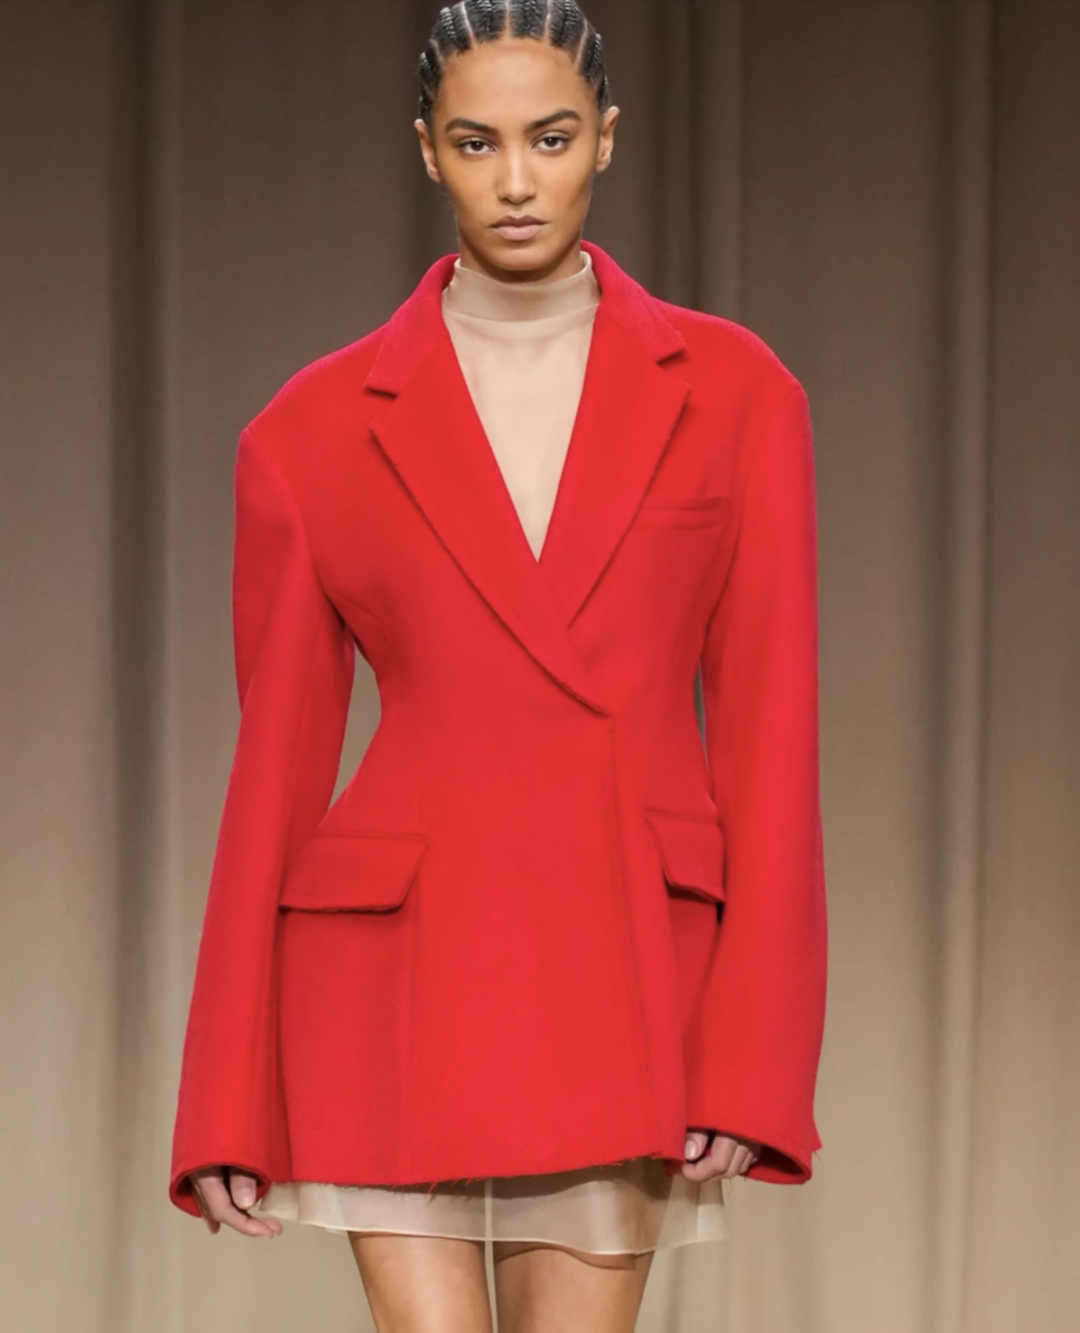 Trending for Spring and Summer 2023, A Fashion Overview - Madison to ...